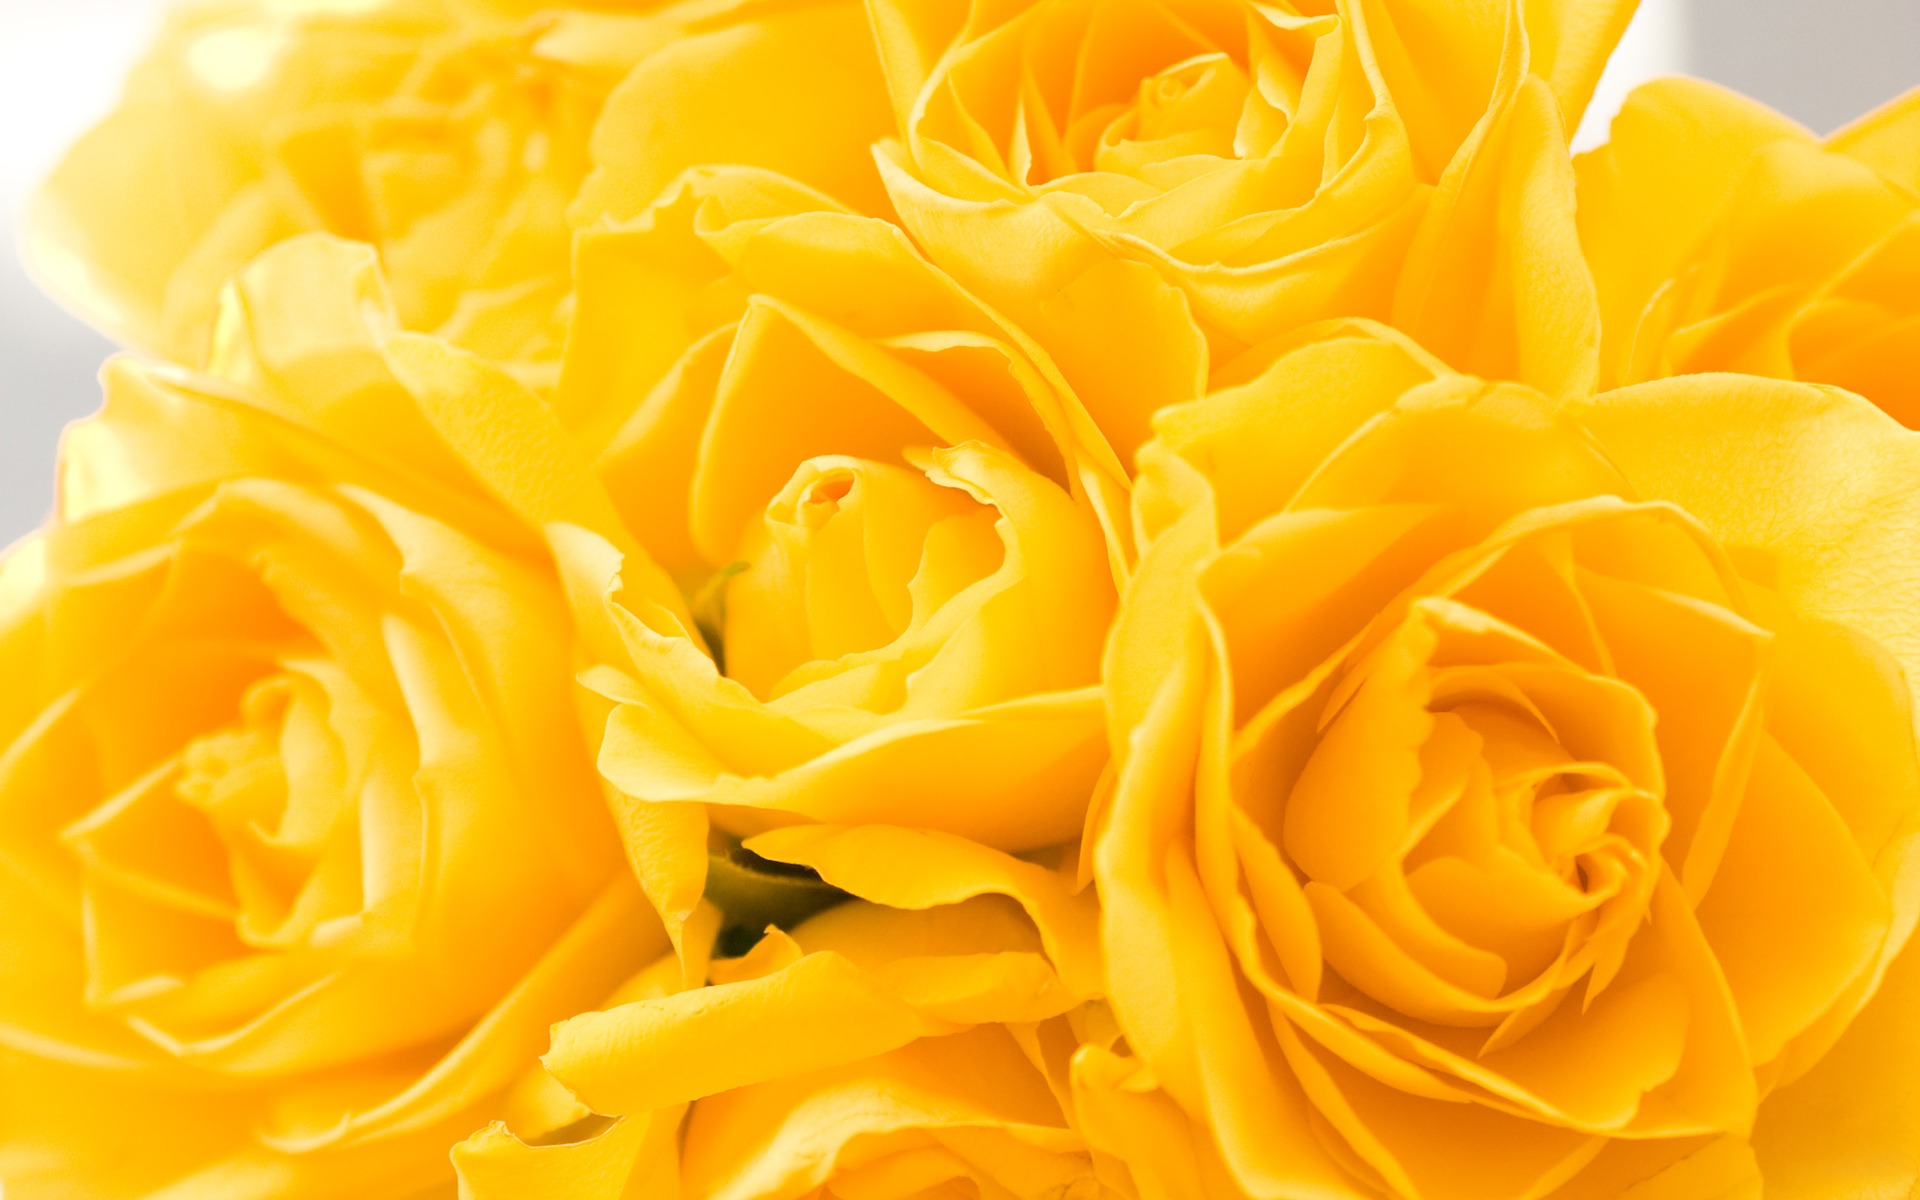 Yellow Roses Wallpaper   Wallpaper High Definition High Quality